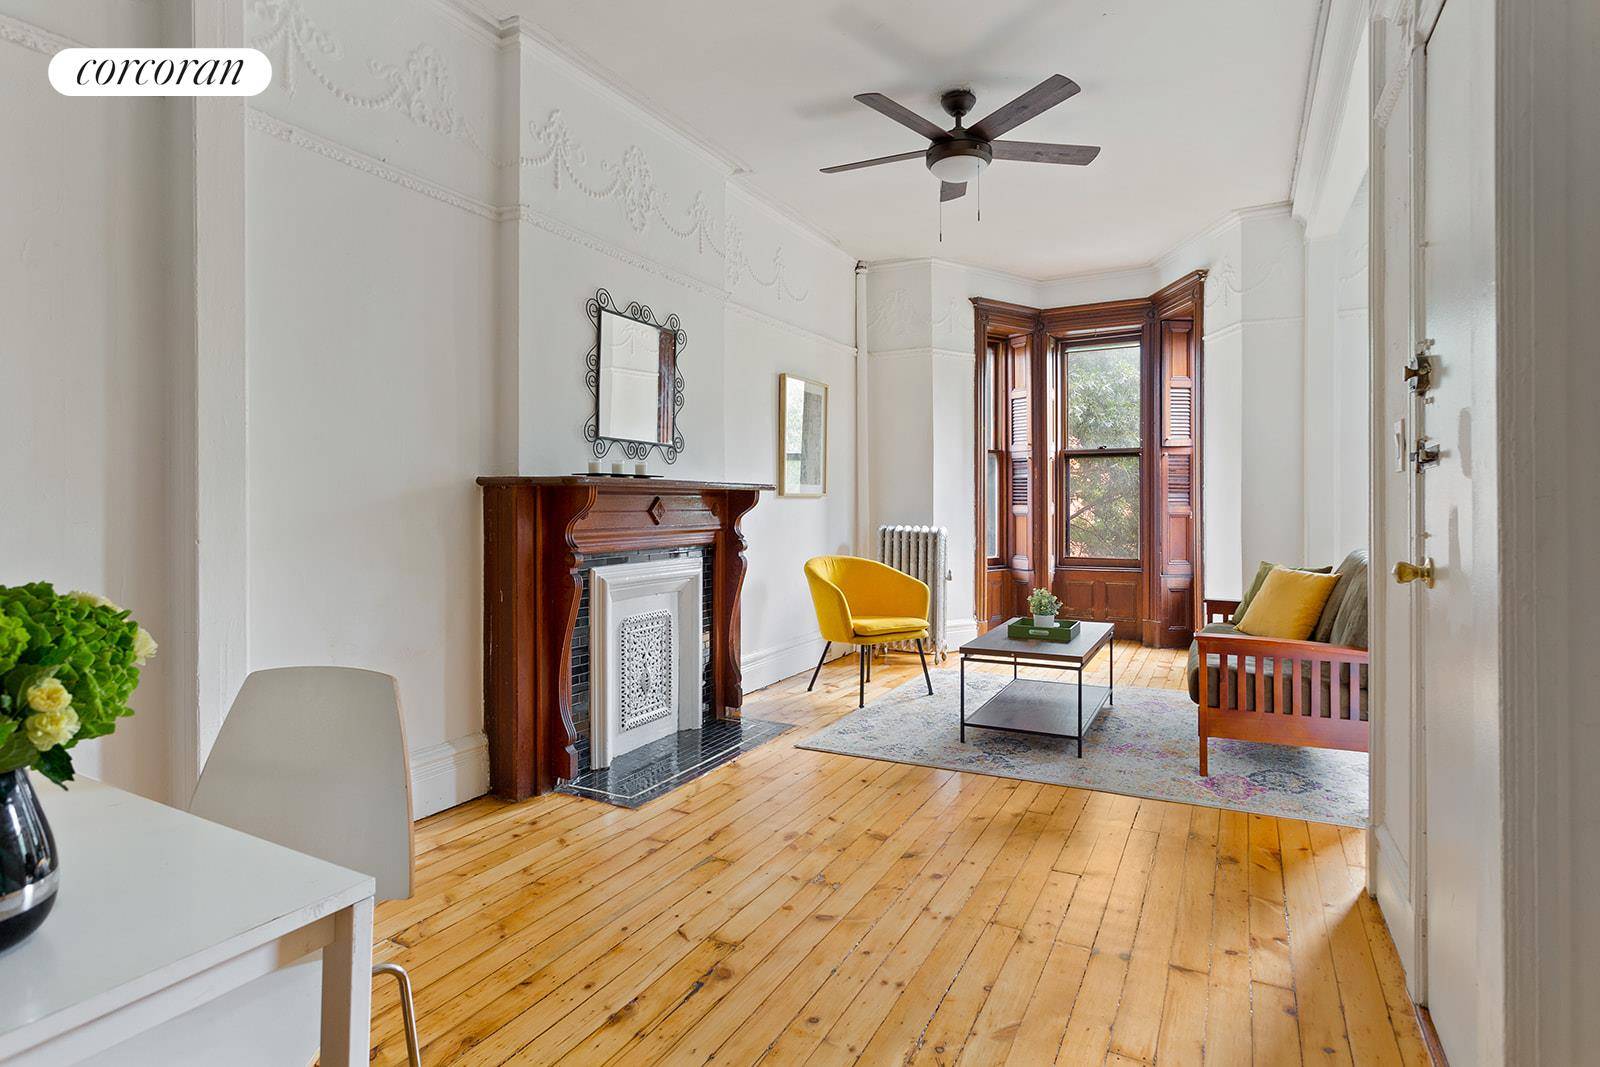 A PARK SLOPE TREASURE... SOMETHING TO DREAM ABOUT This charming 2 bedroom floor through on President Street in prime Park Slope provides room to grow and charm to spare.